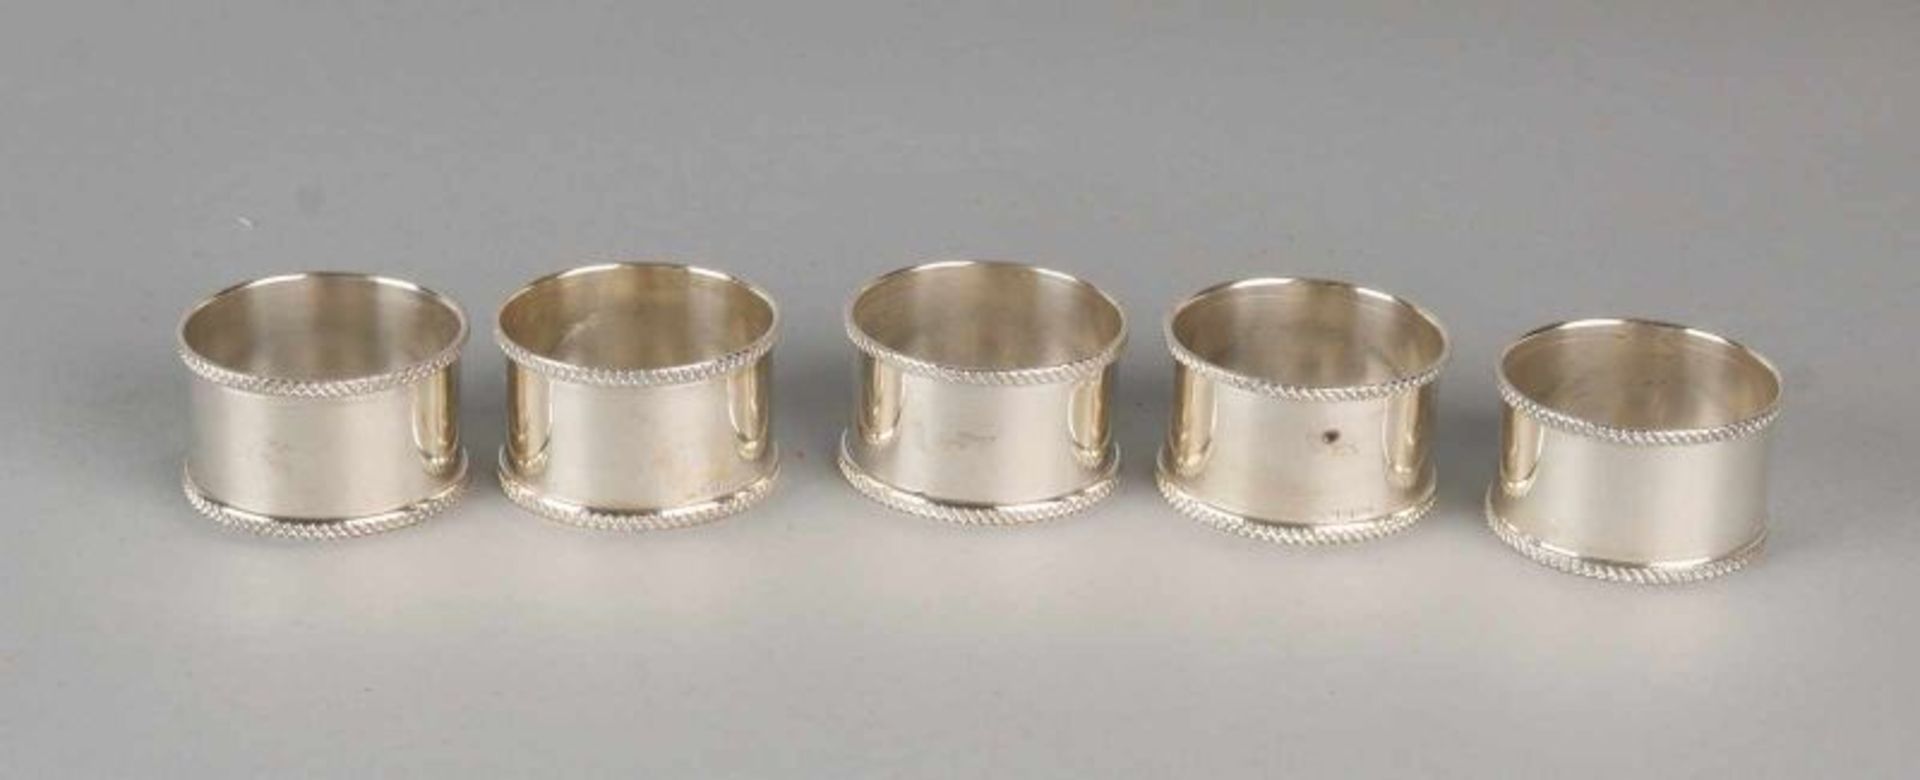 Lot six same napkin bands, 835/000, round models with a machined edge. about 105 grams. ø 5x2,5cm.